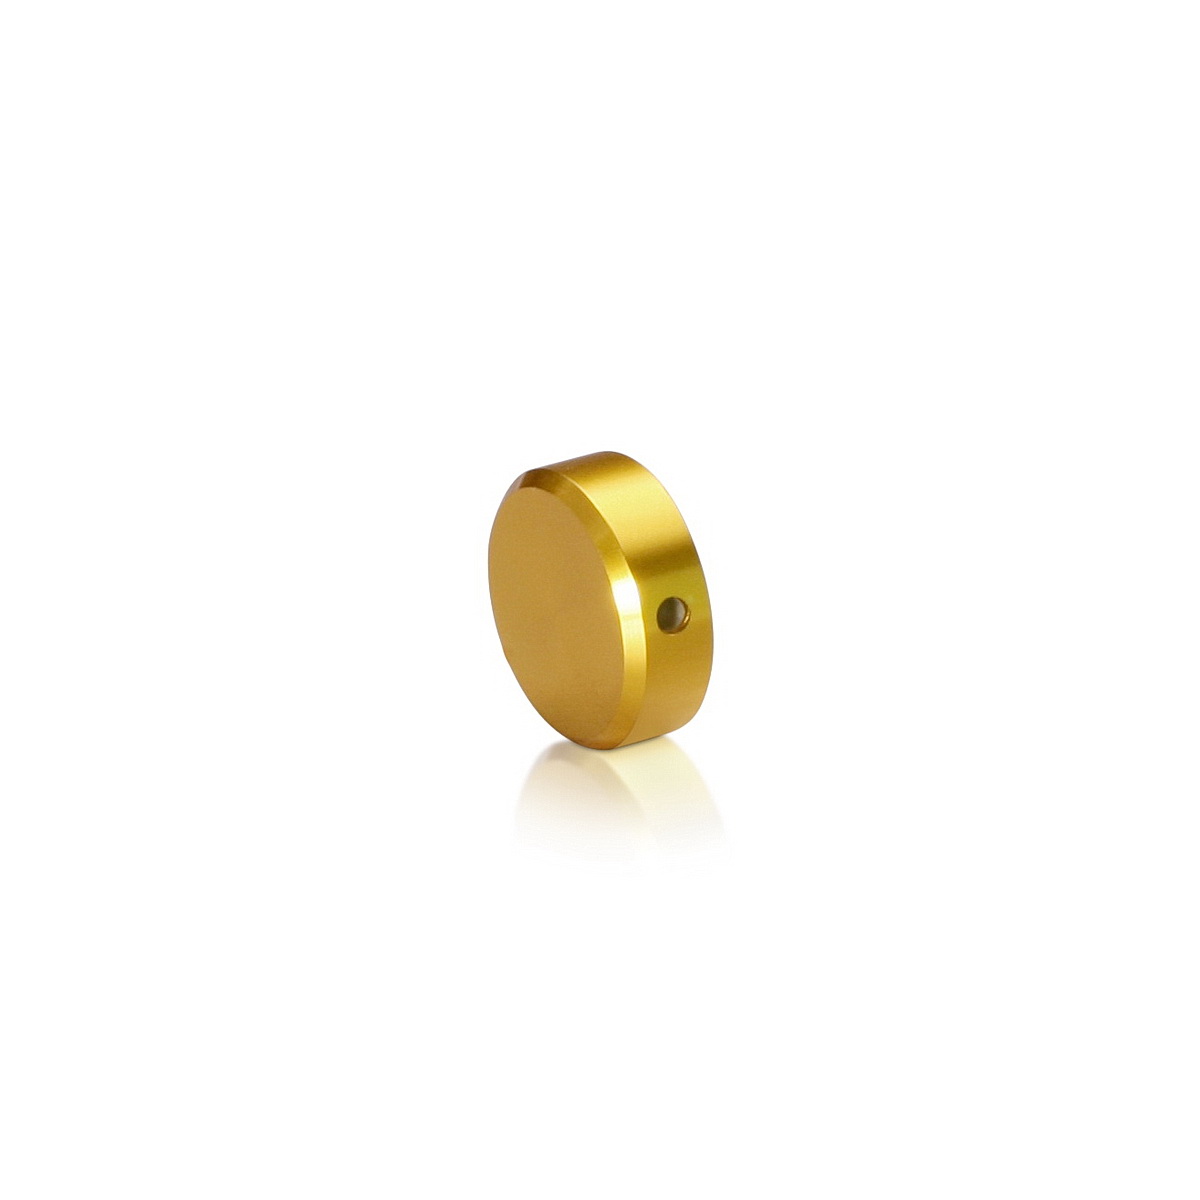 5/16-18 Threaded Locking Caps Diameter: 3/4'', Height: 3/8'', Gold Anodized Aluminum [Required Material Hole Size: 3/8'']